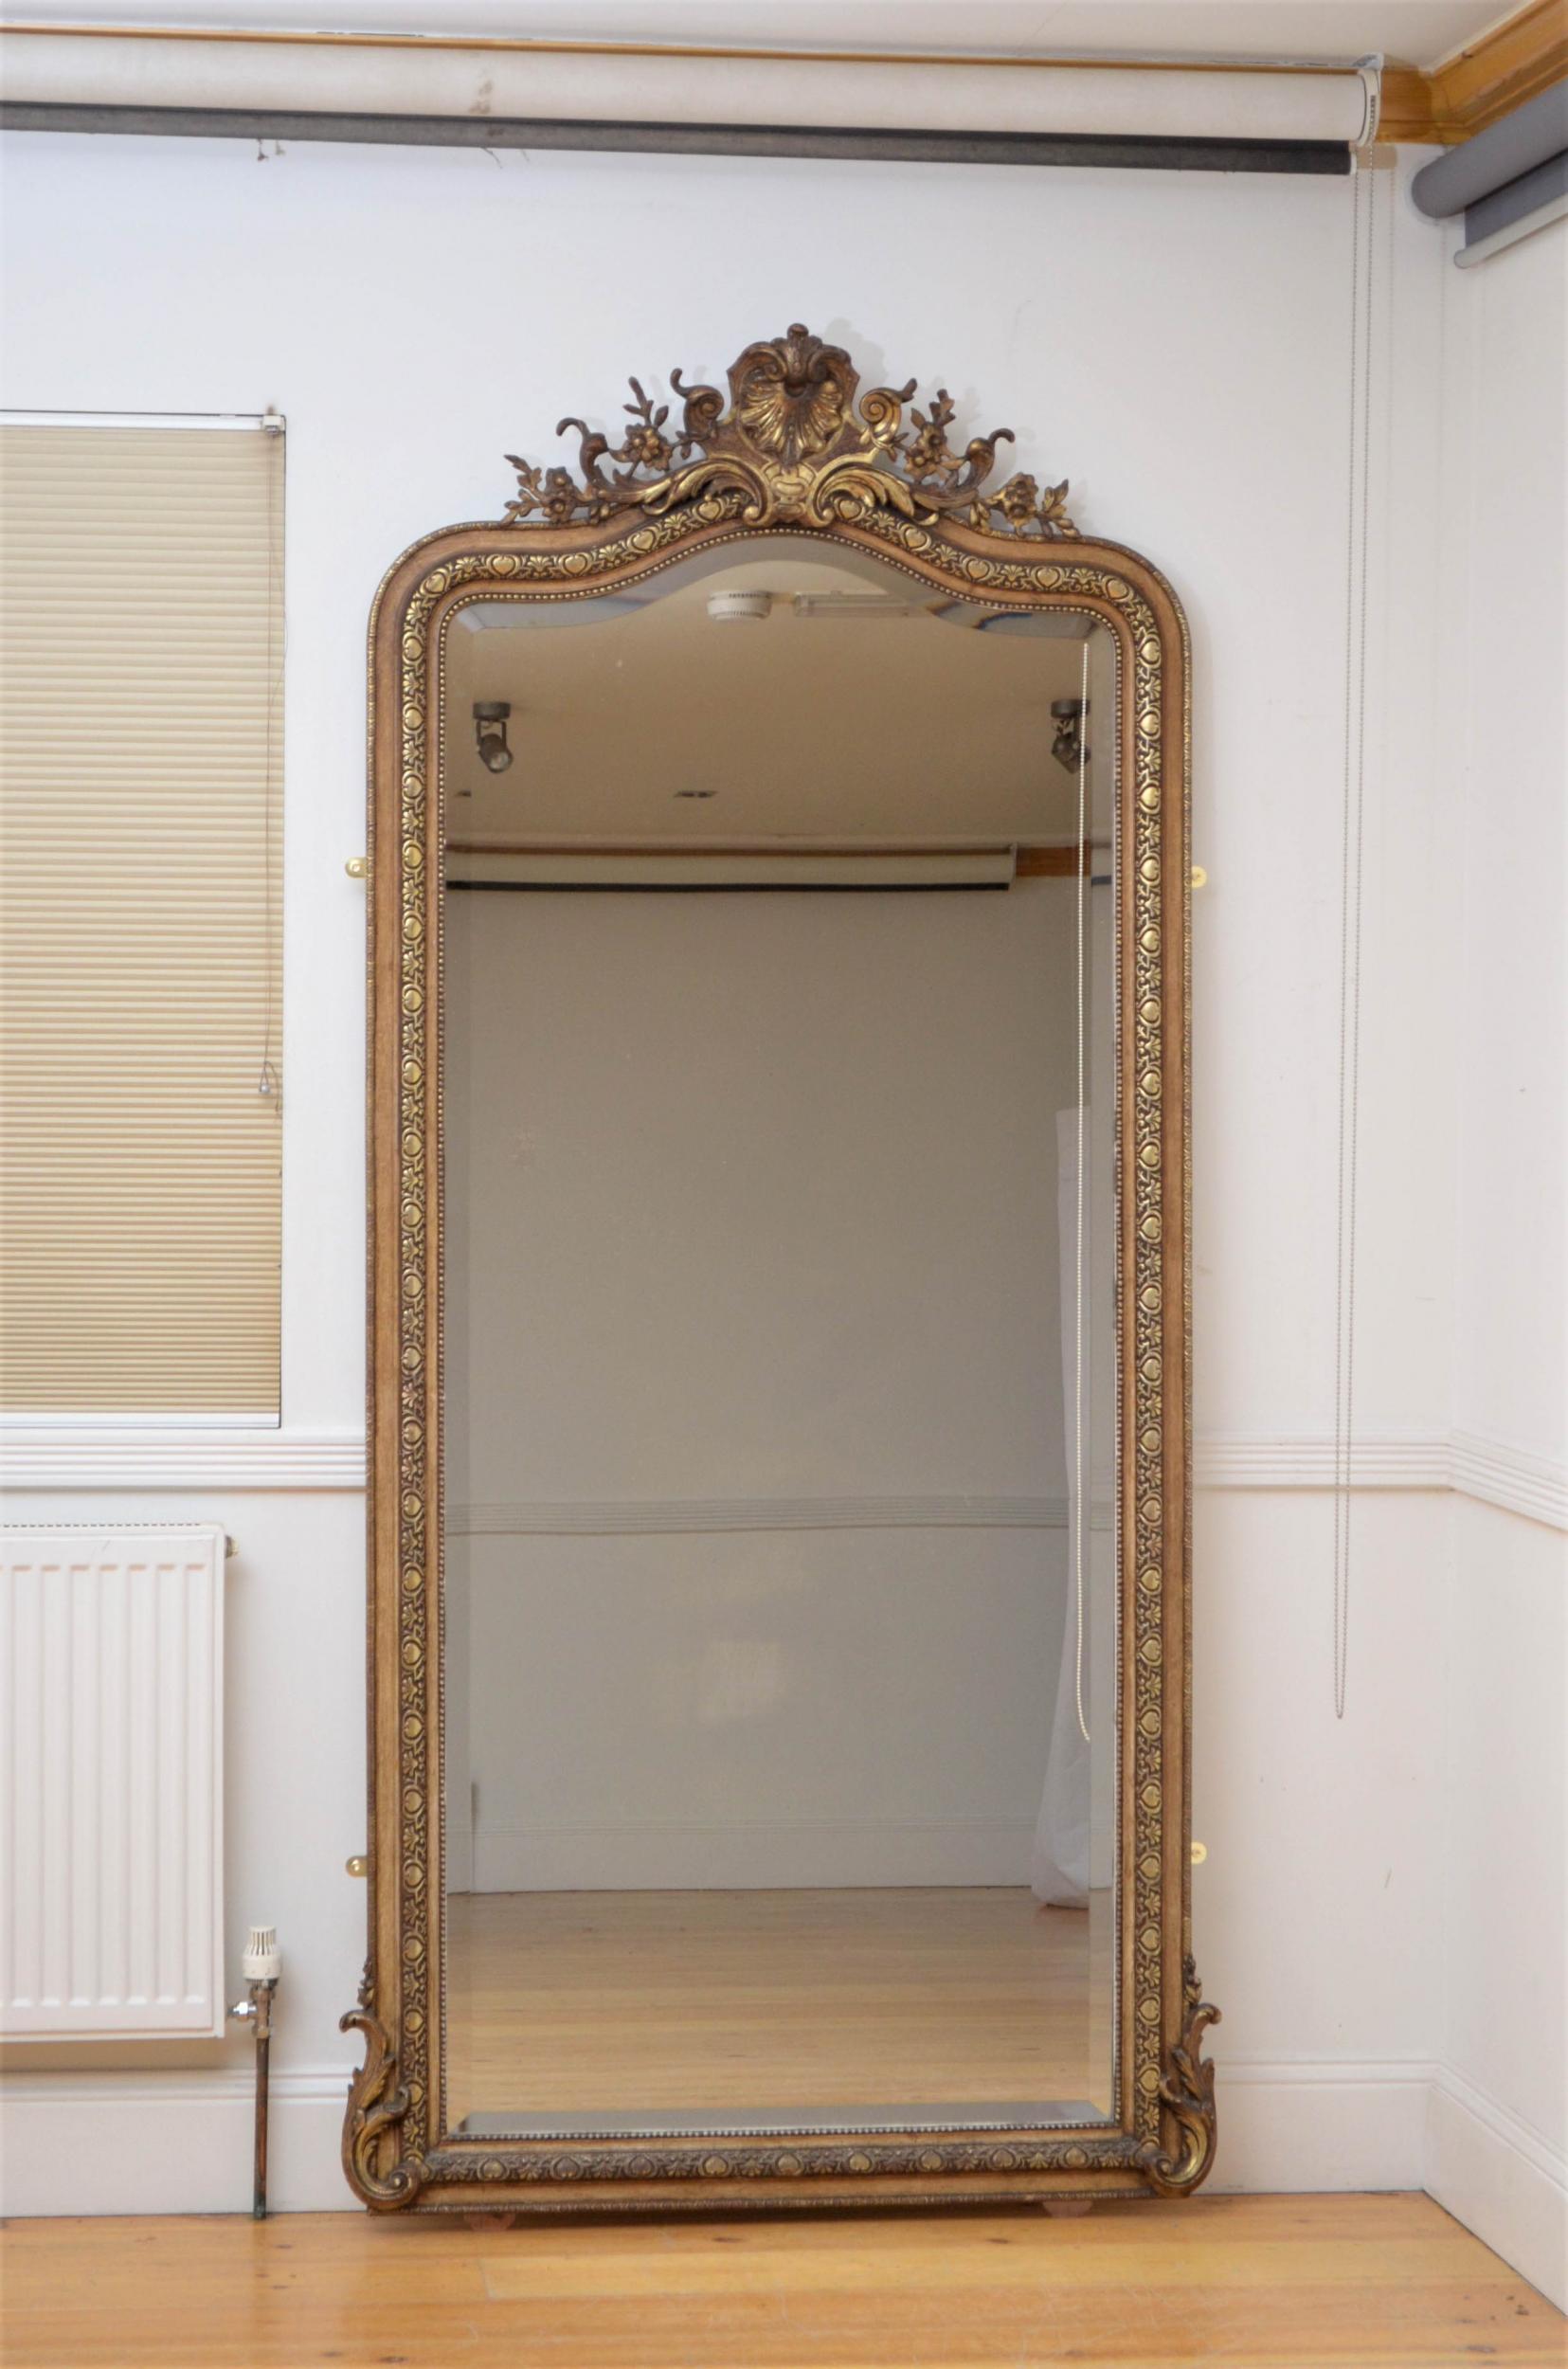 Sn5021 exceptional 19th century French simulated walnut and gilt mirror, having original bevelled edge glass with some imperfections in beaded and finely carved frame with leafy scrolls to the base and shell centre crest decorated with foliage